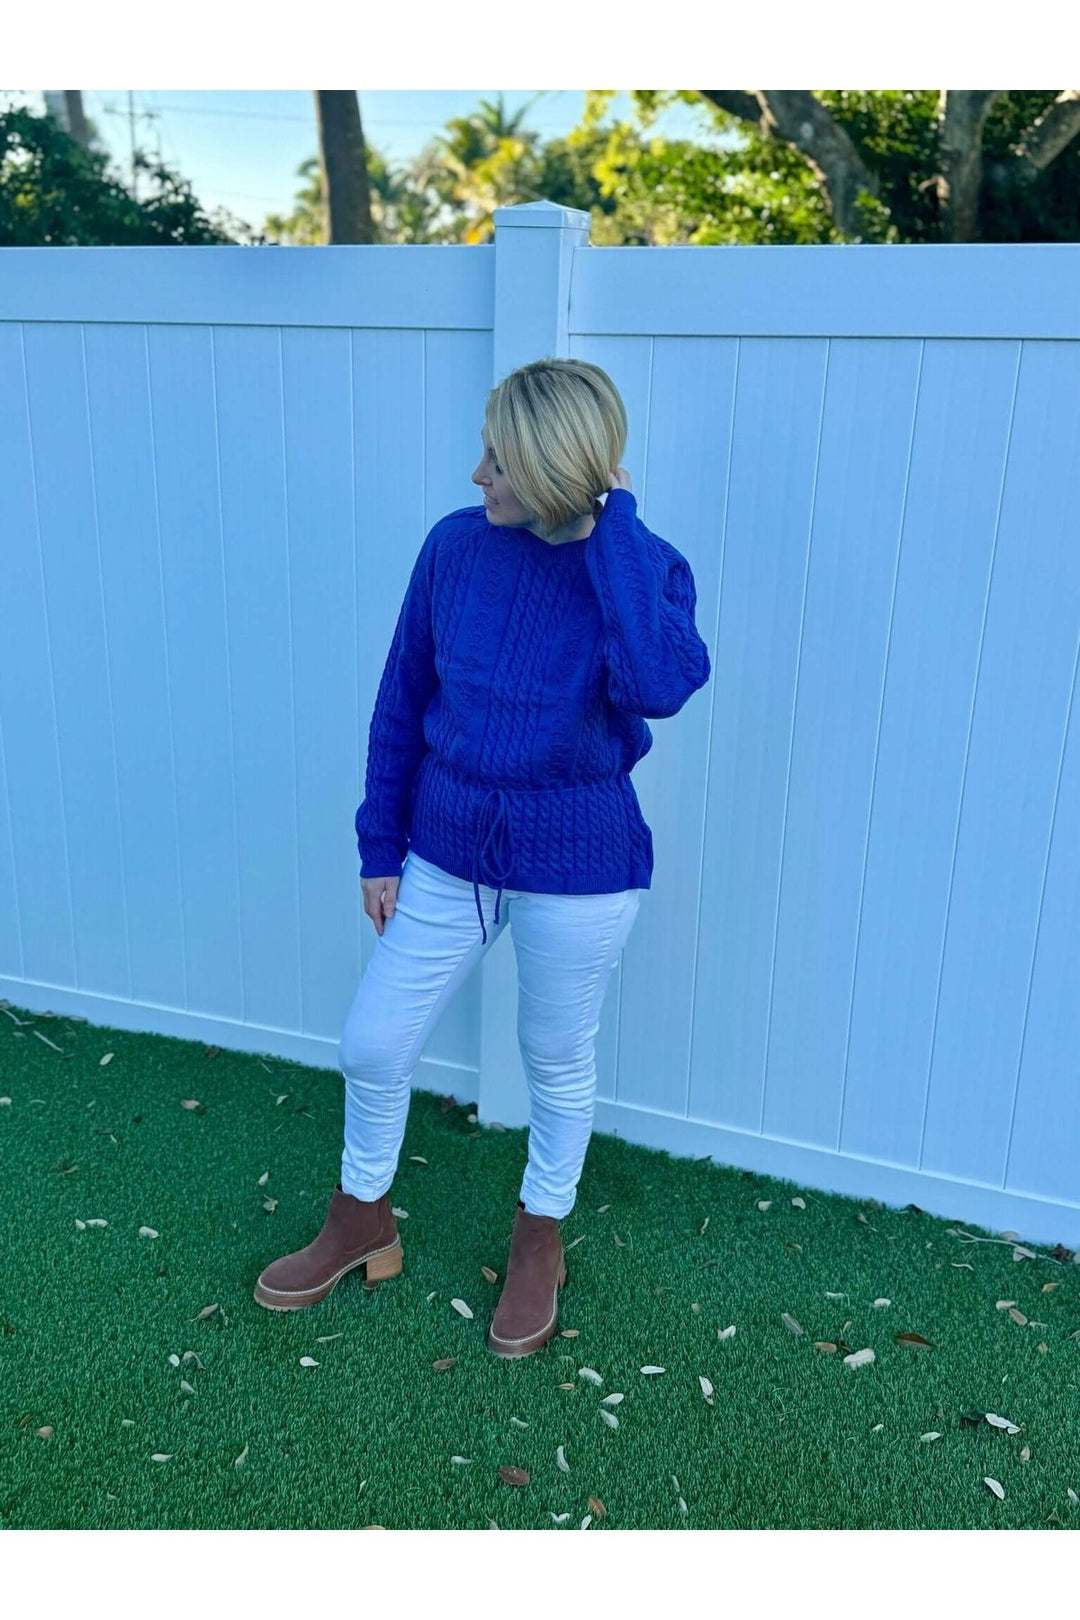 Blue Cable Knit Sweater with Drawstring Tie Waist - Lolo Viv Boutique